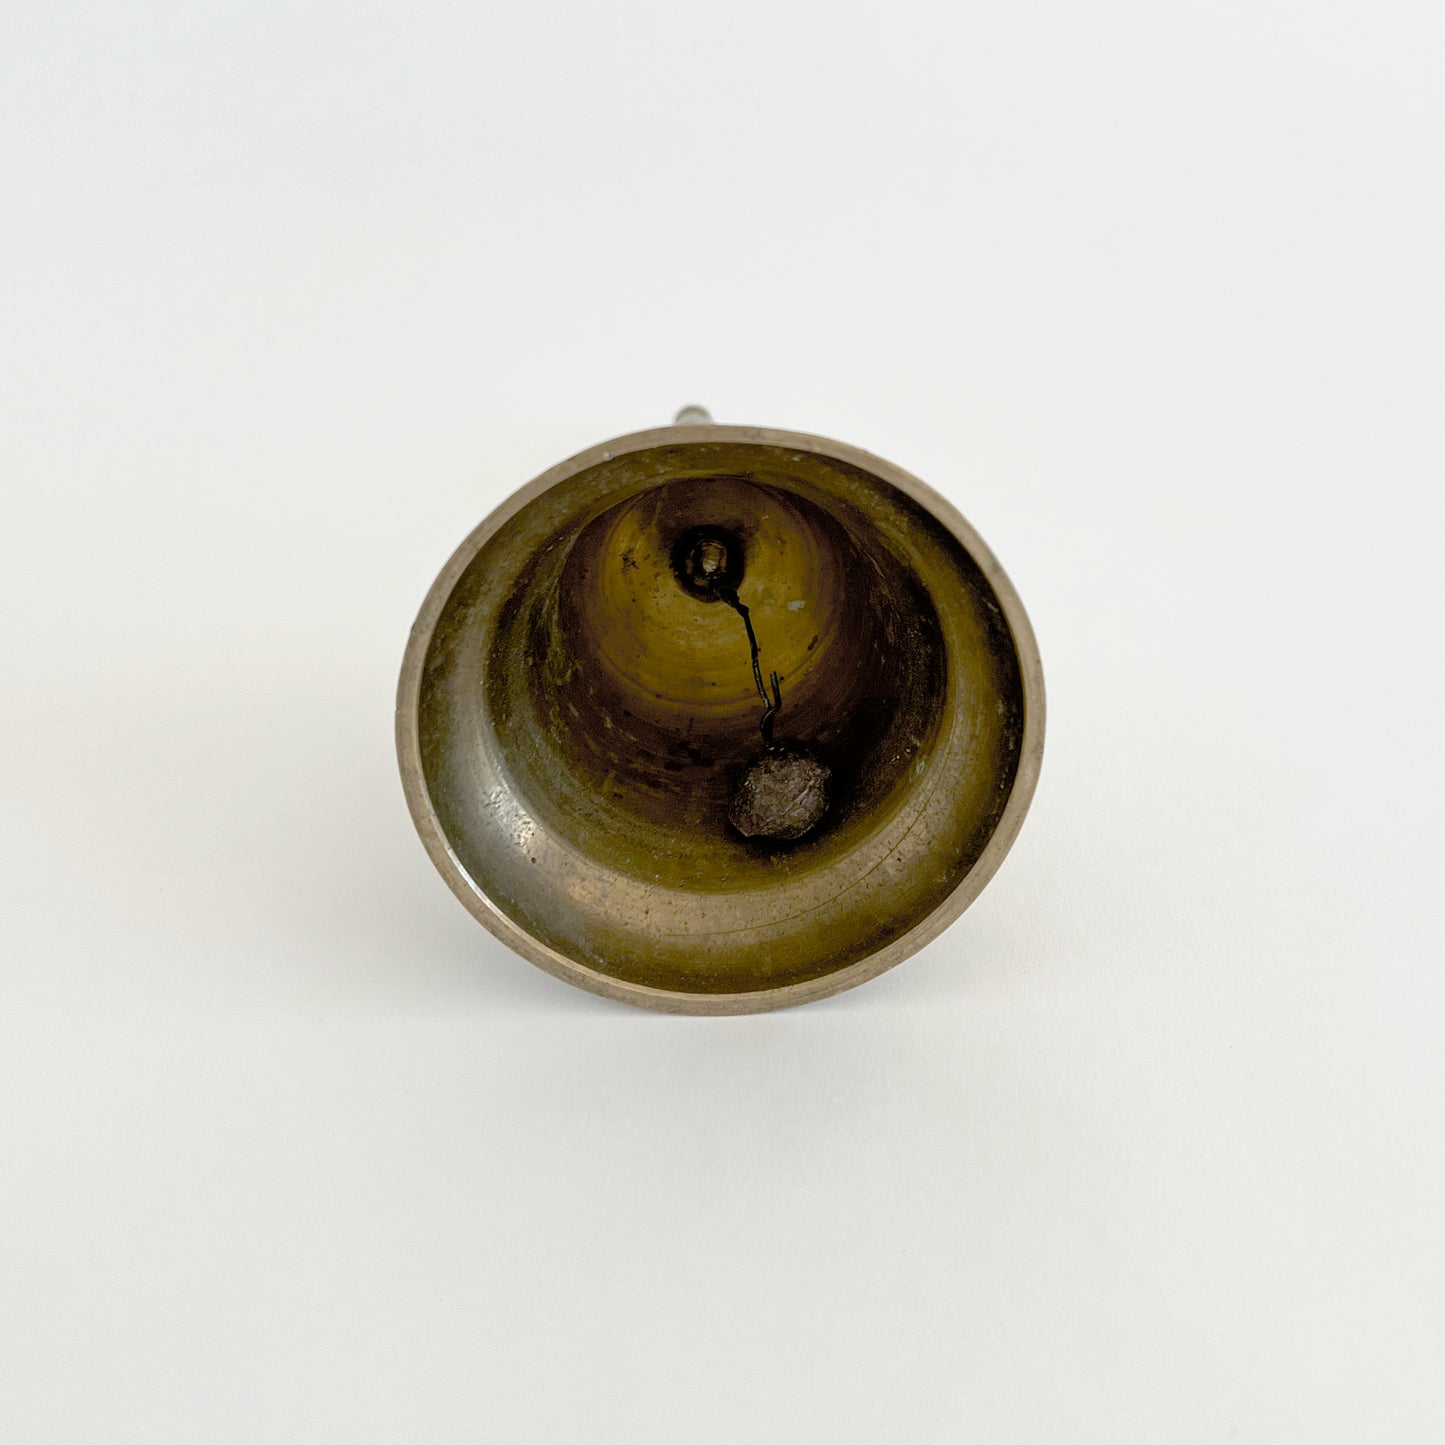 Antique Indian brass bell with cloisonné enamel